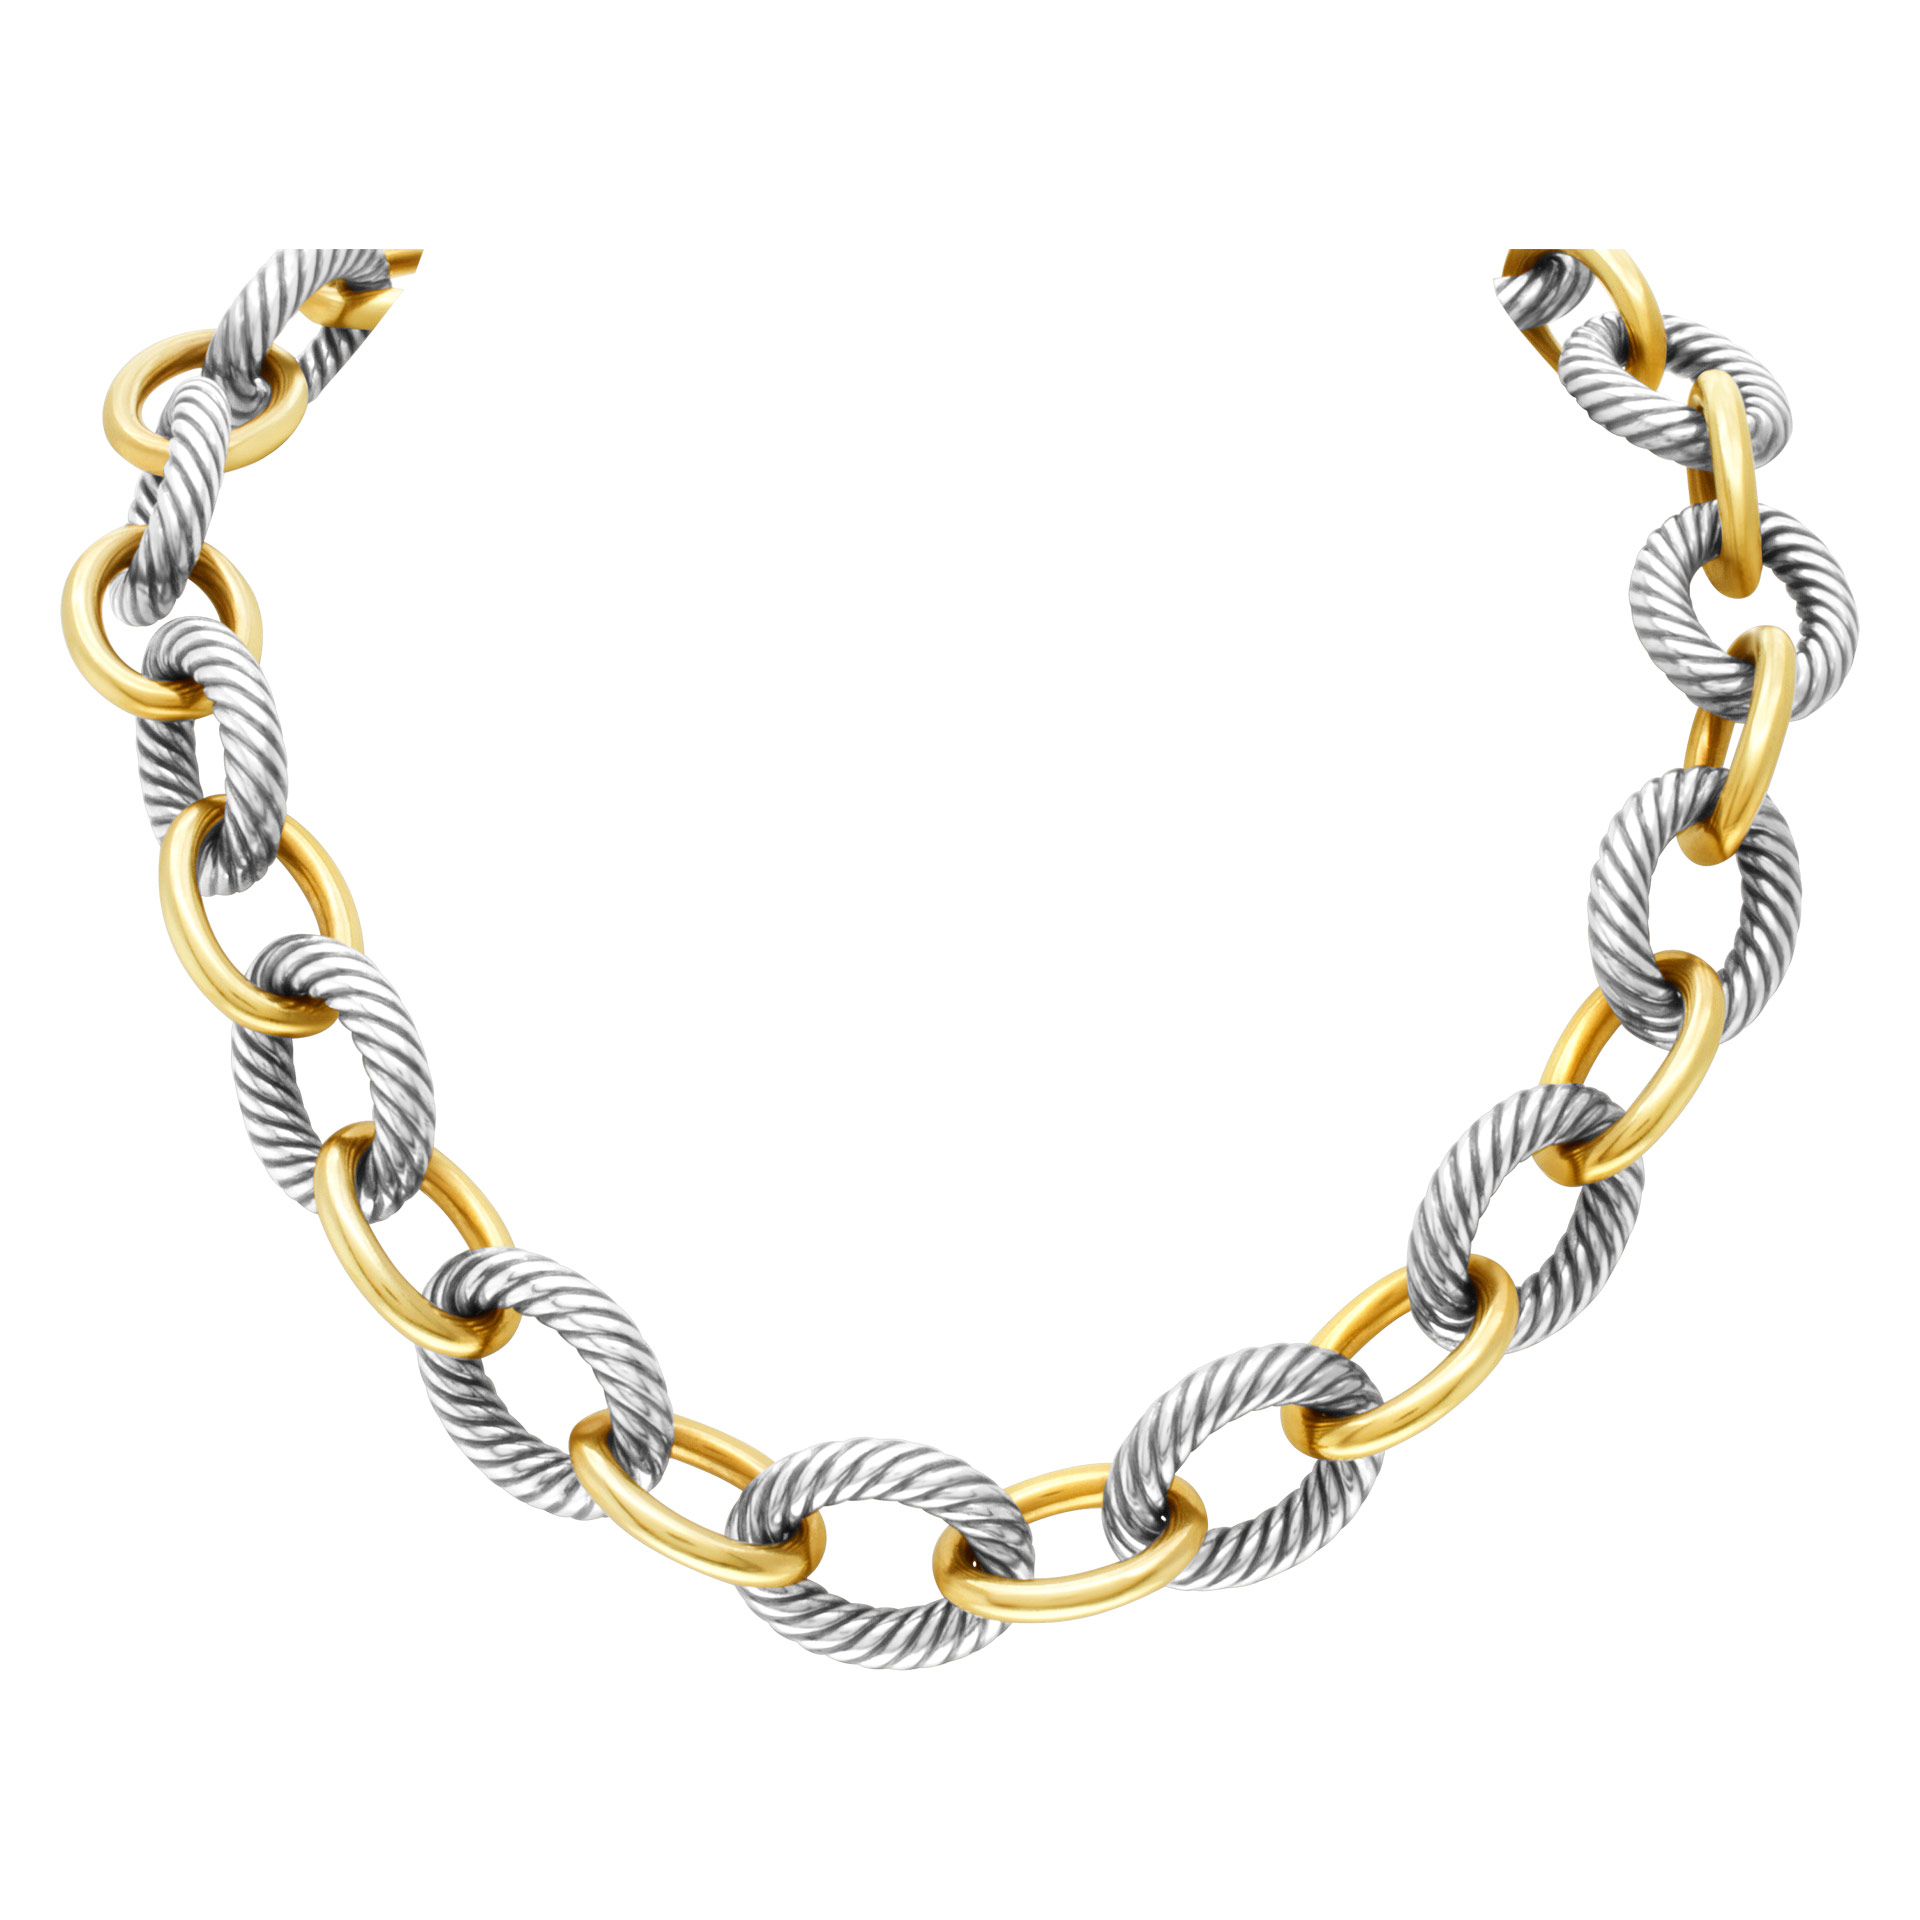 David Yurman XL oval link necklace in 18k yellow gold & sterling silver. 16" long image 1